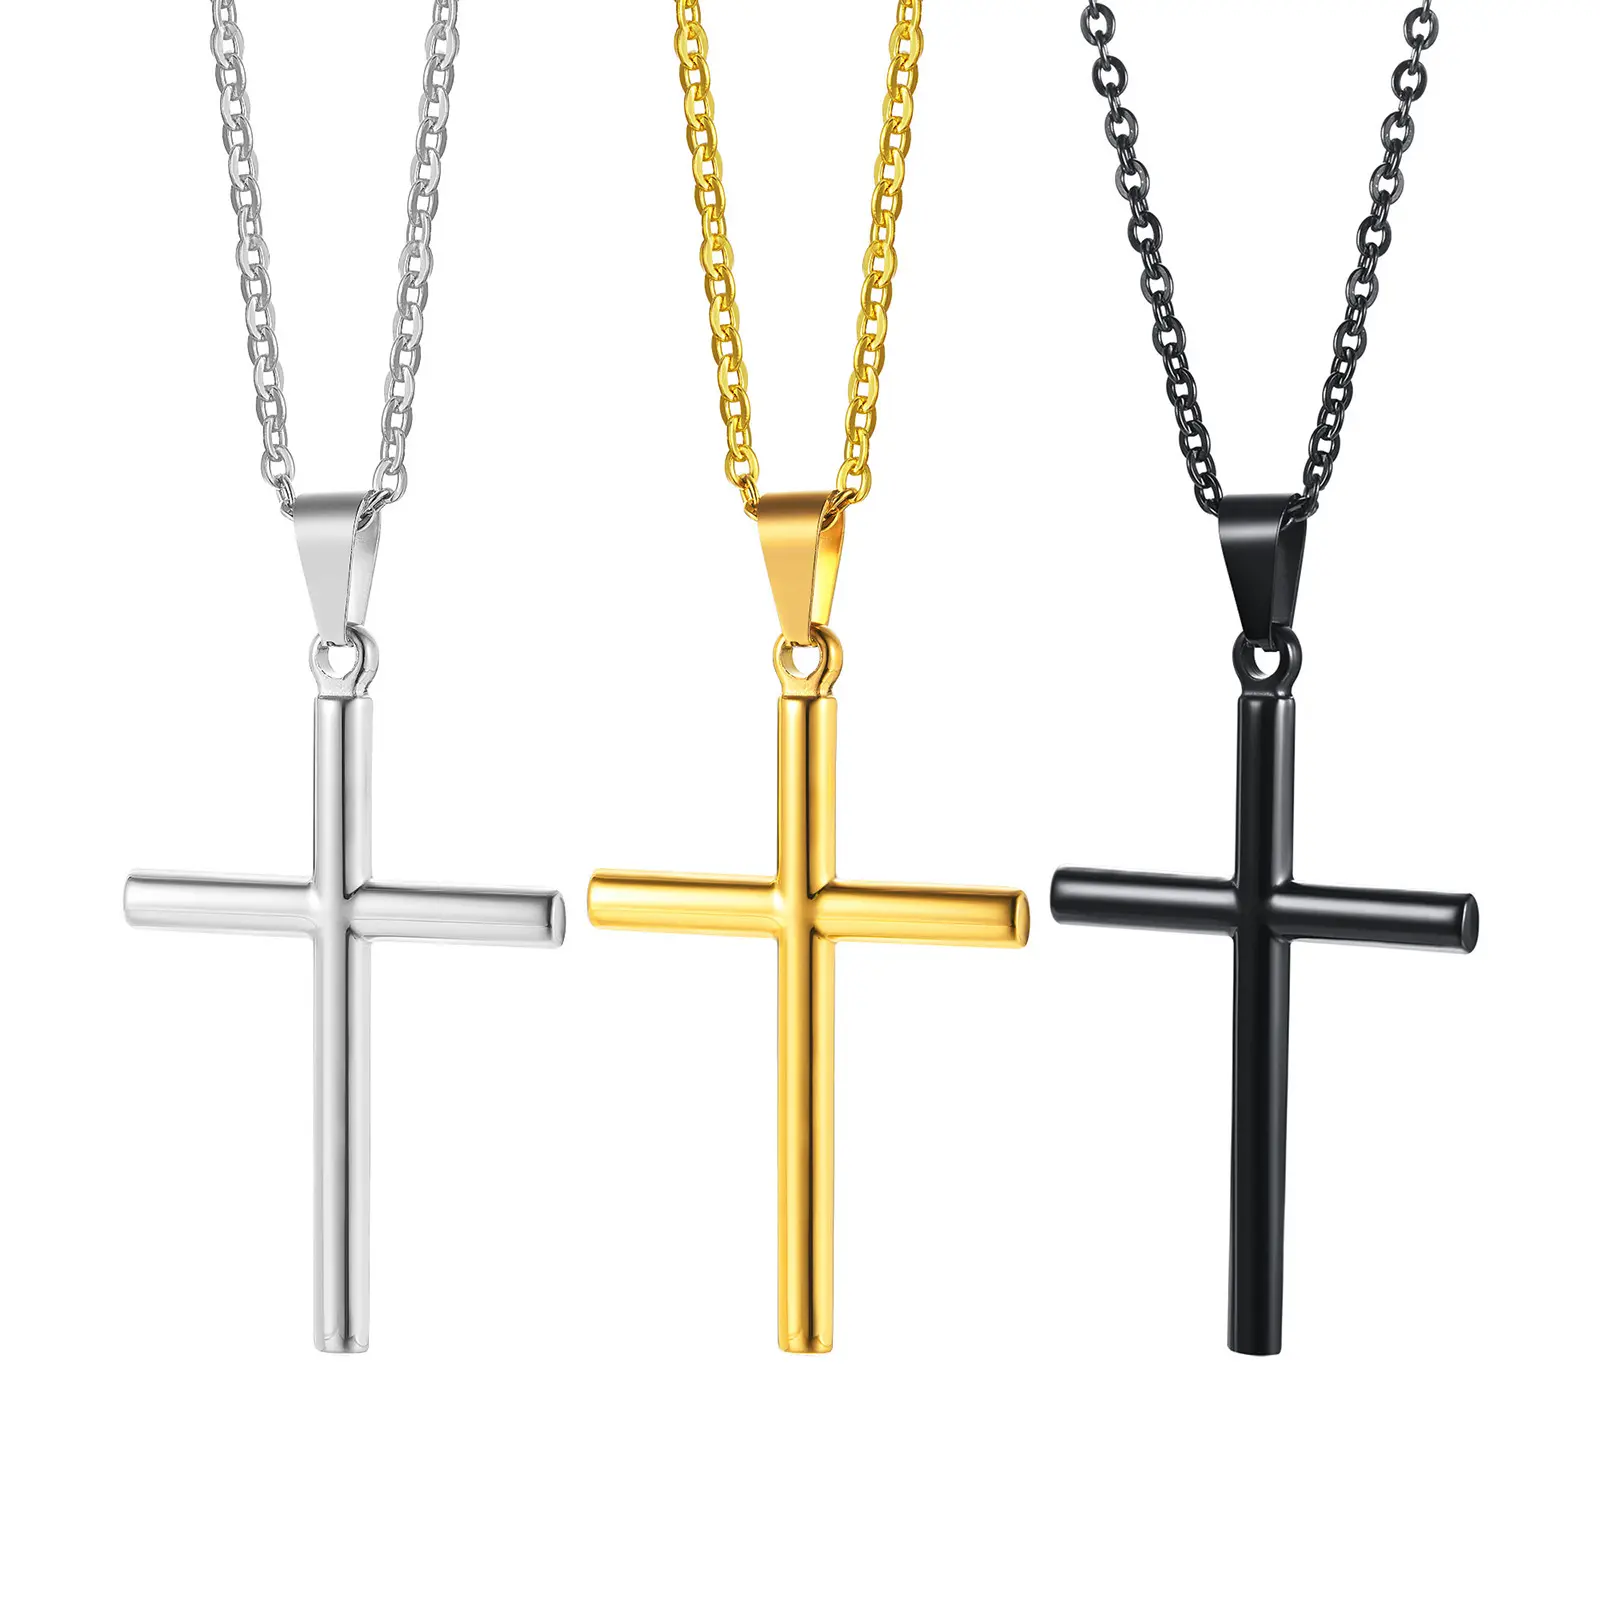 Fashion Wholesale Necklace Silver Gold Black Men Pendant Necklace Stainless Steel High Quality Cross Necklace